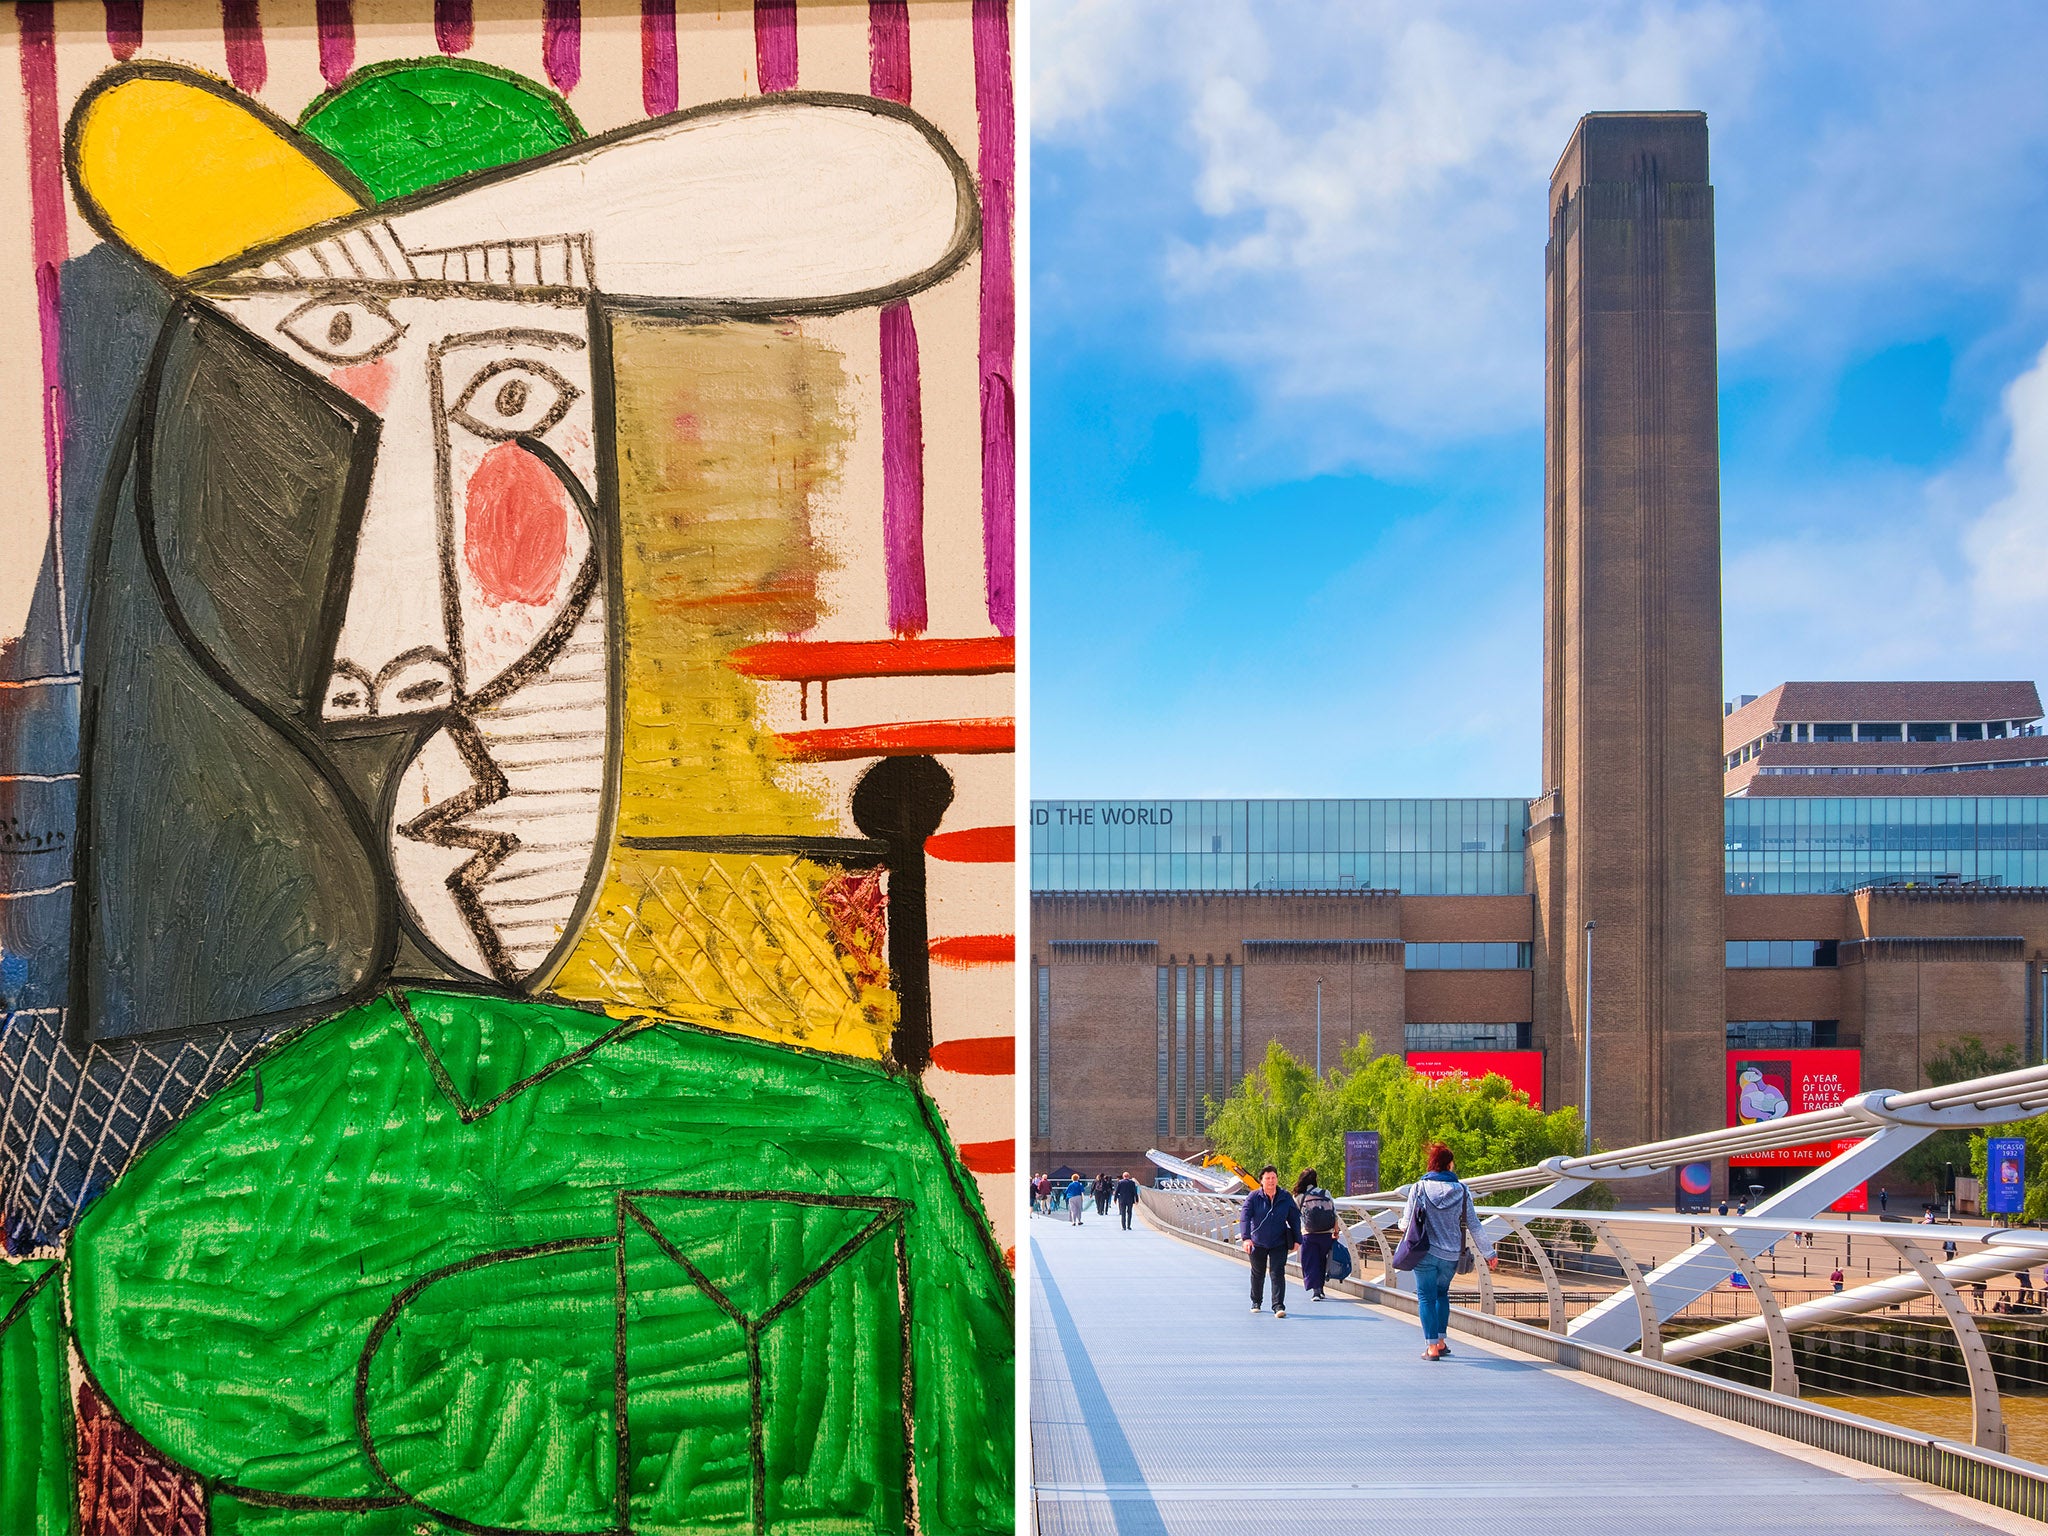 Picasso painting worth £20m attacked at Tate Modern The Independent The Independent image